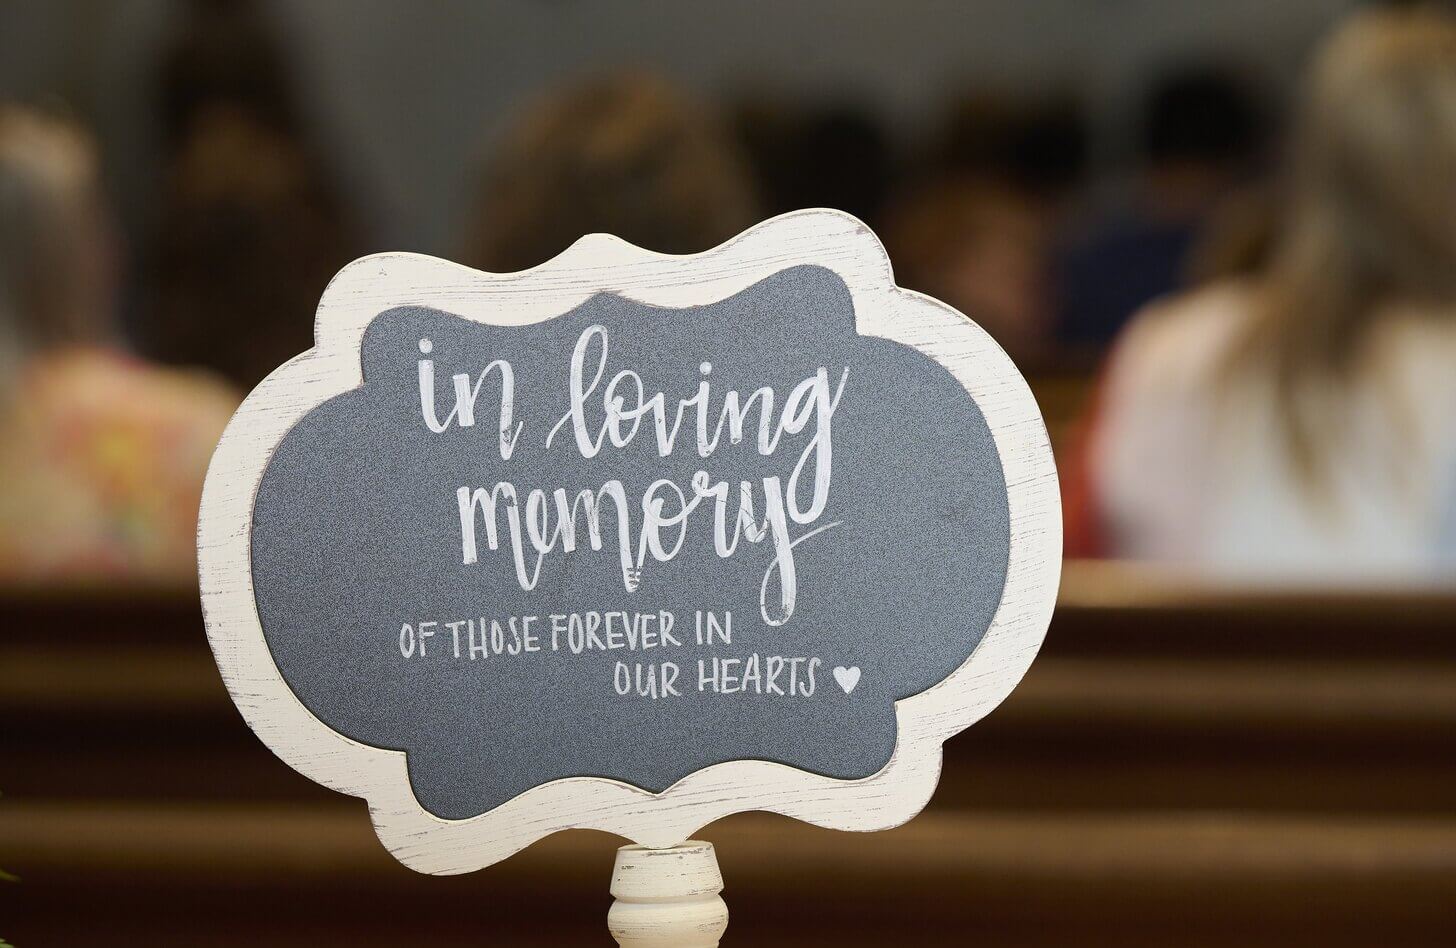 A dark sign with white text and a white border reads " In loving memory of those forever in our hearts"